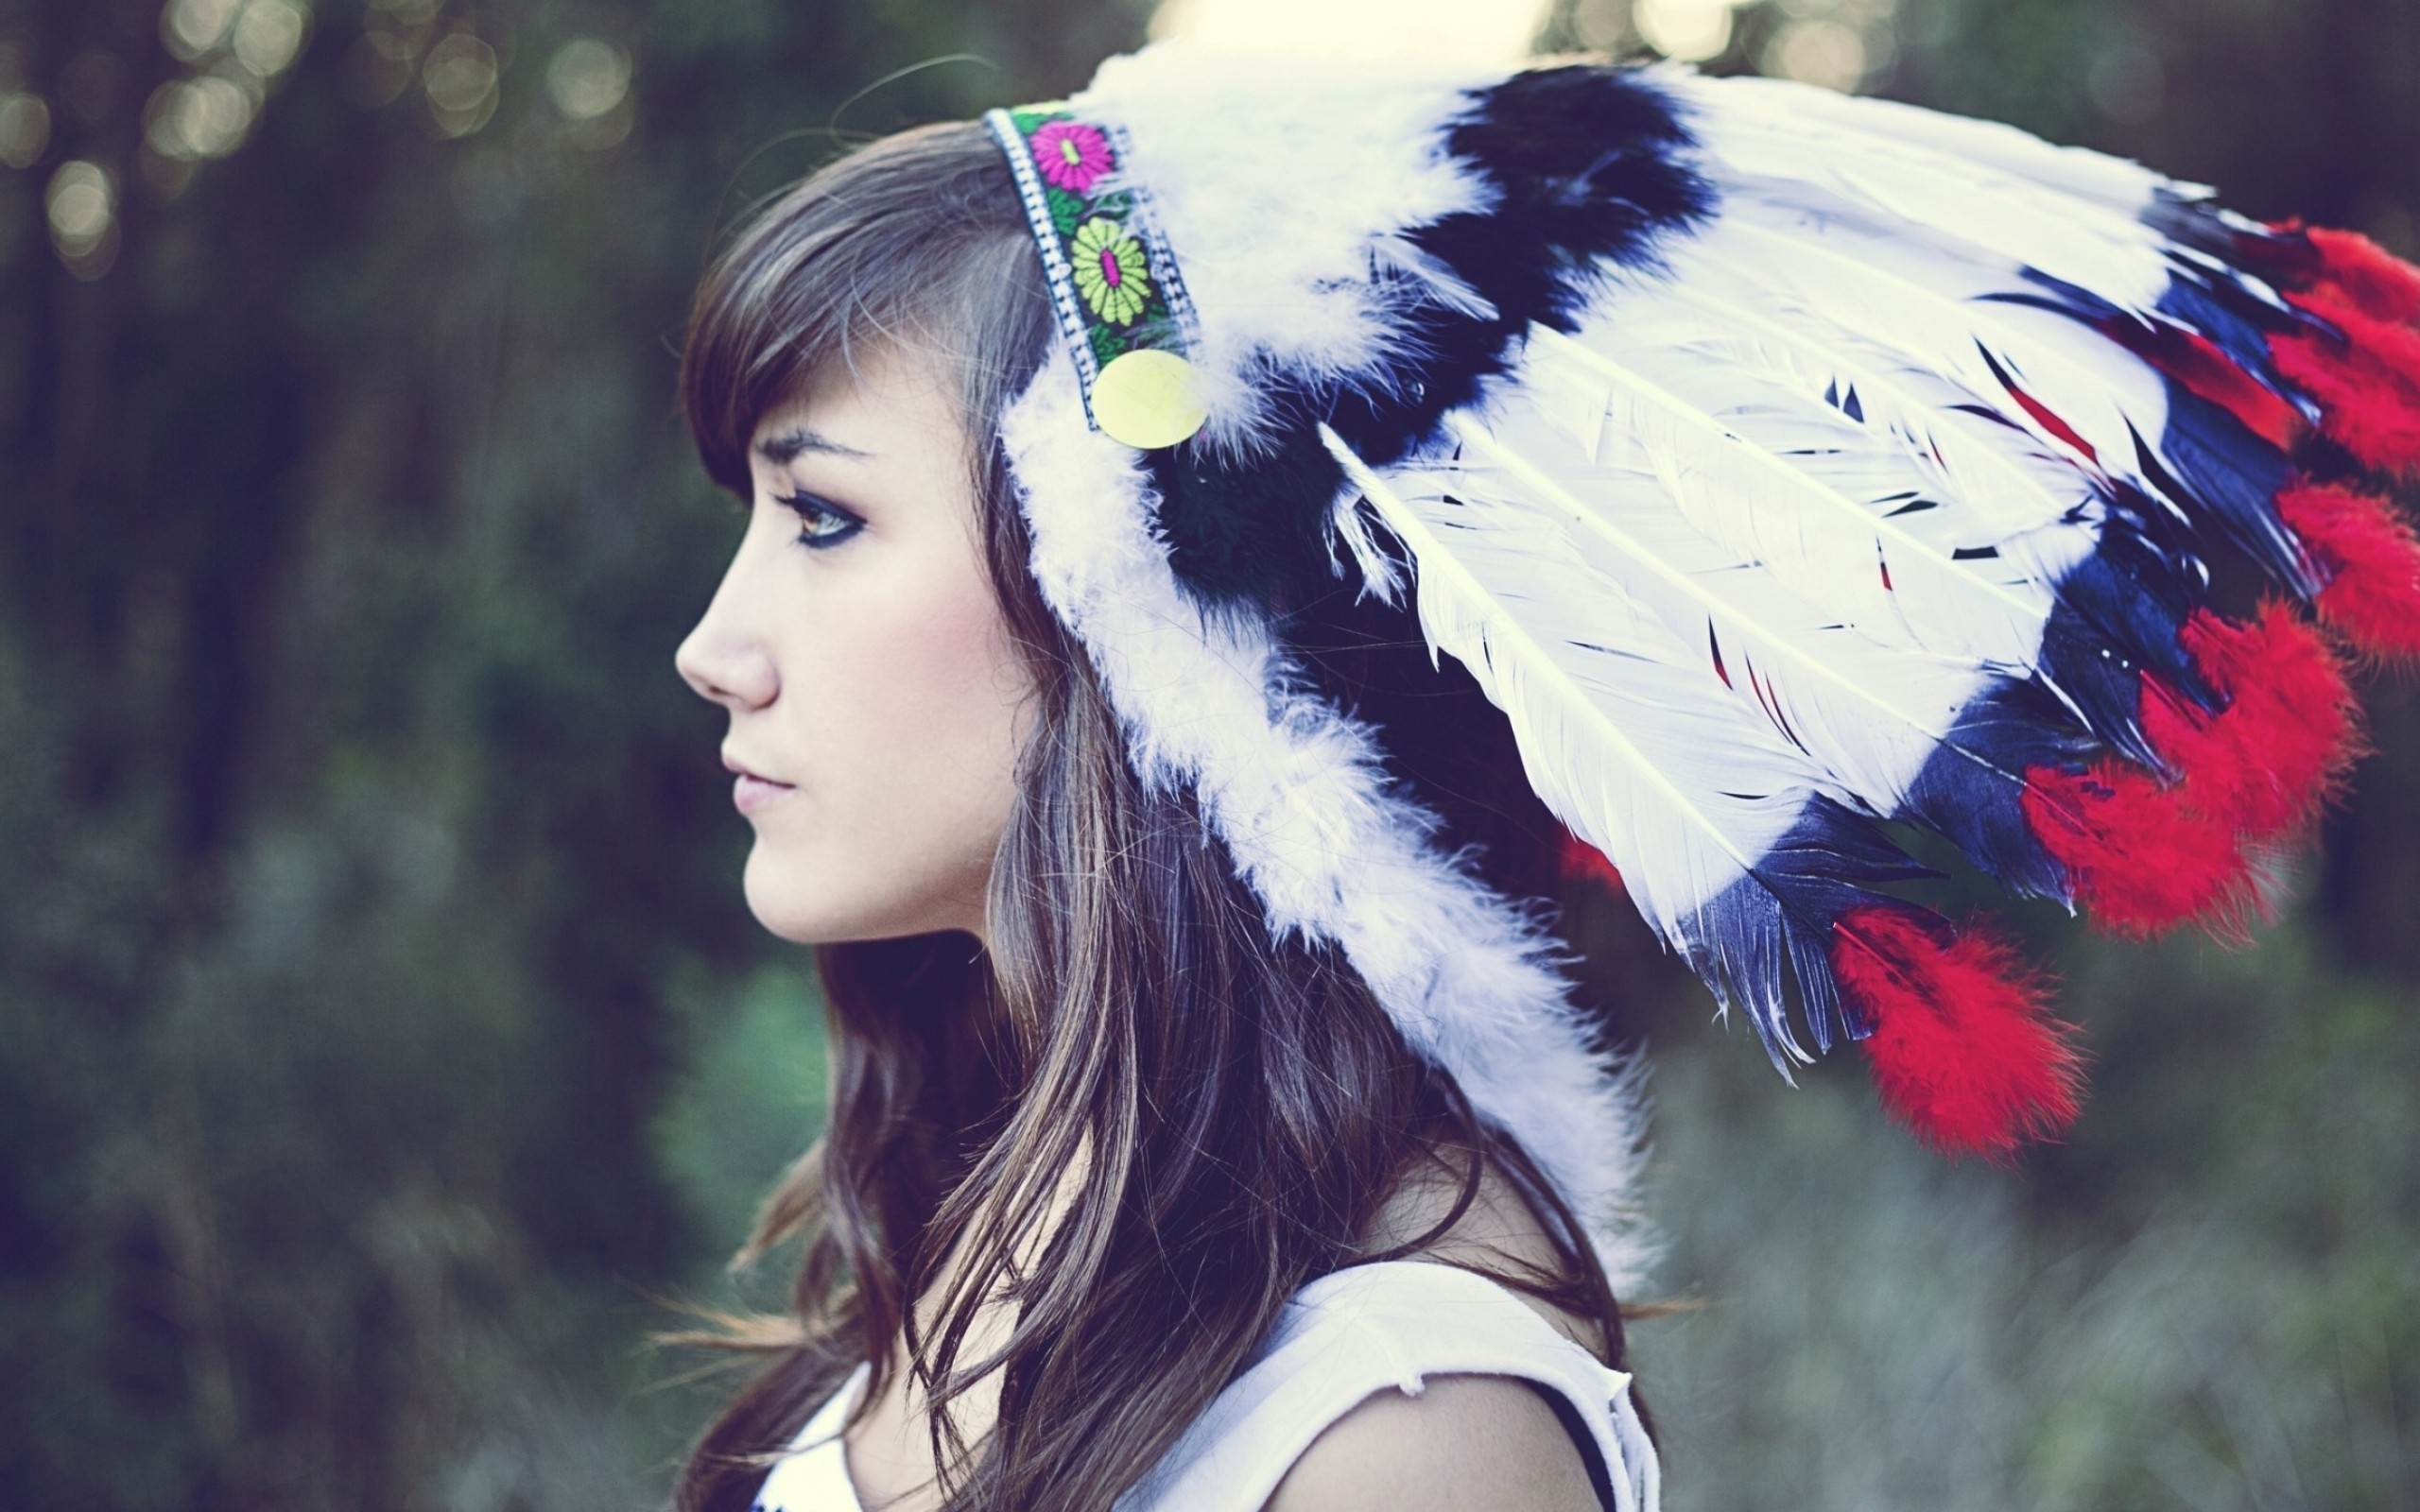 Free photo A girl in an Indian headdress.